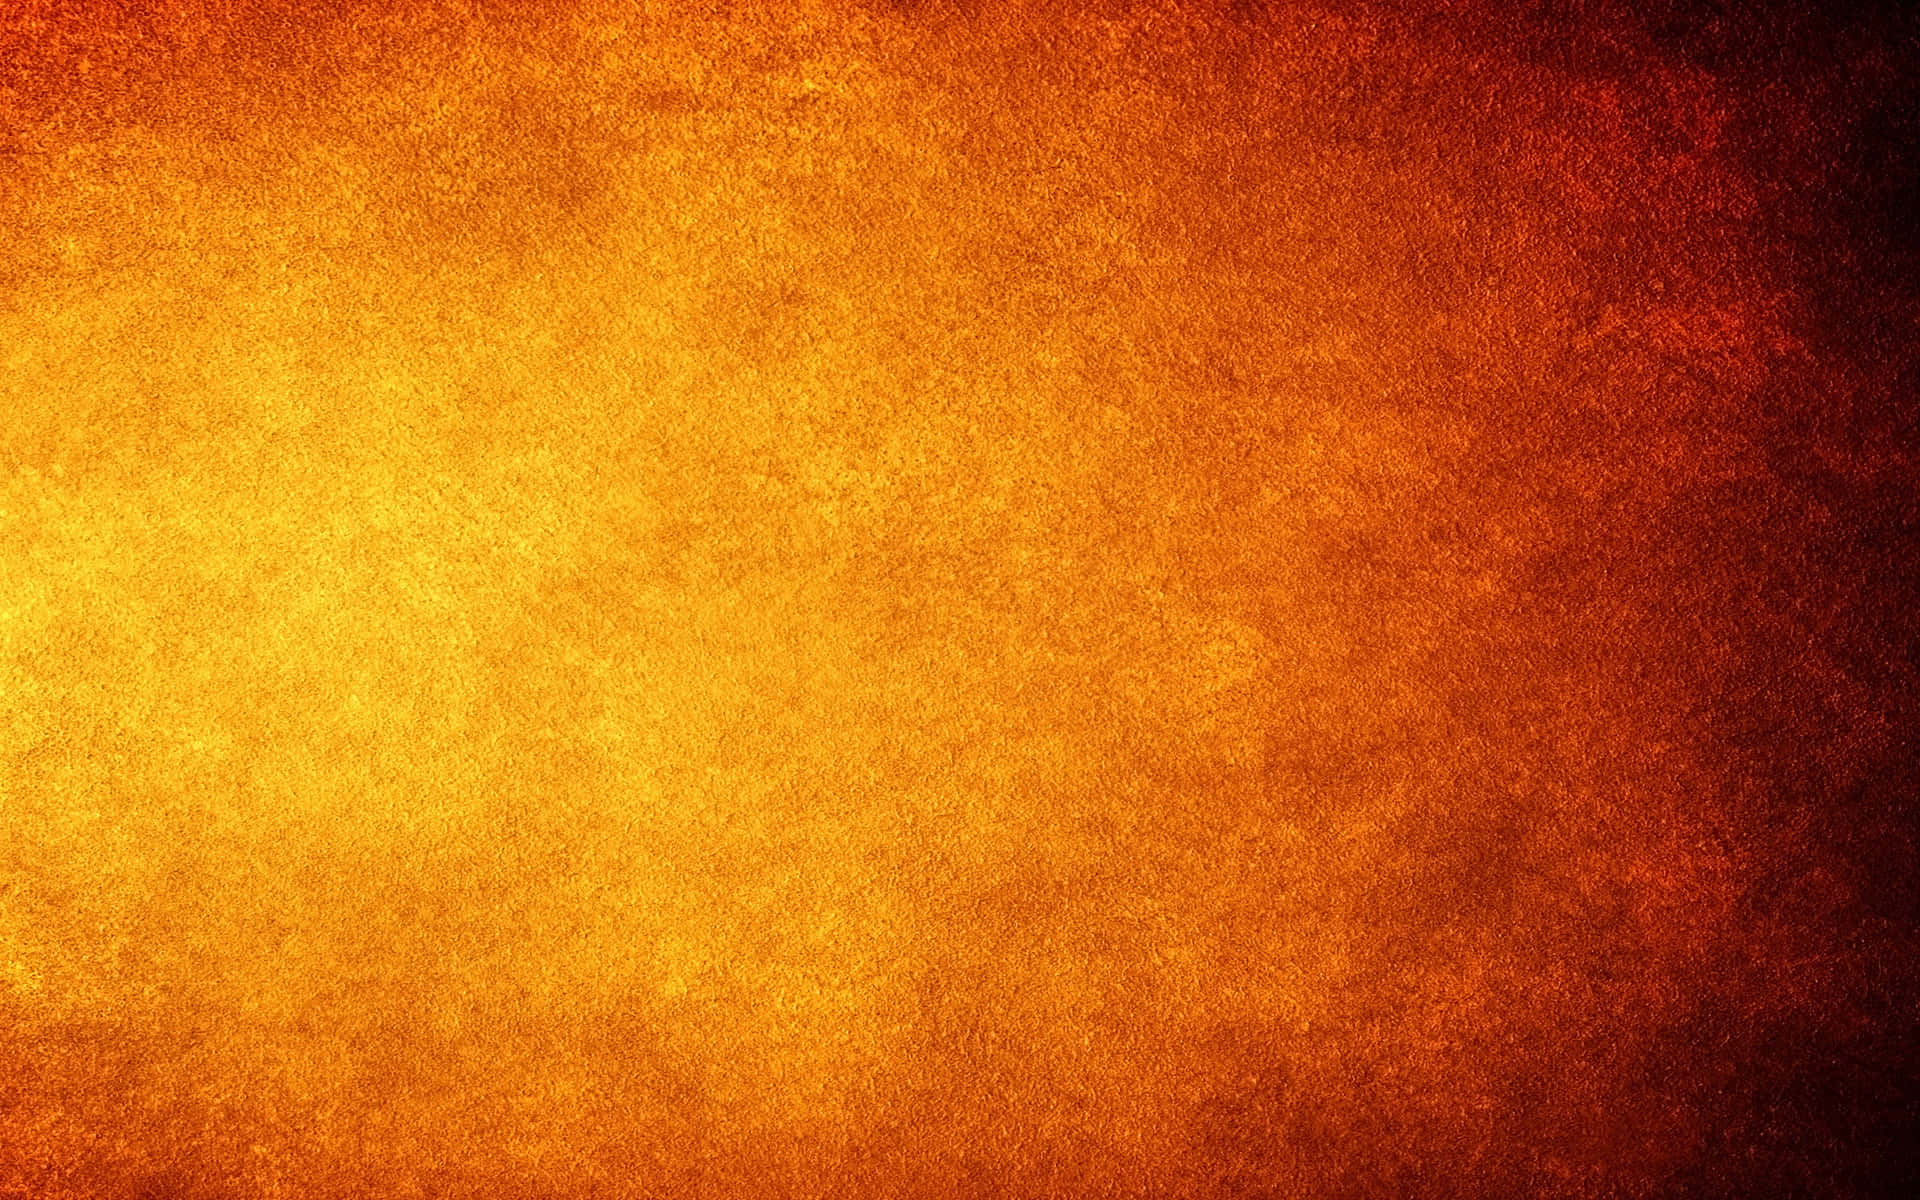 An Eye-Catching Orange Abstract Background